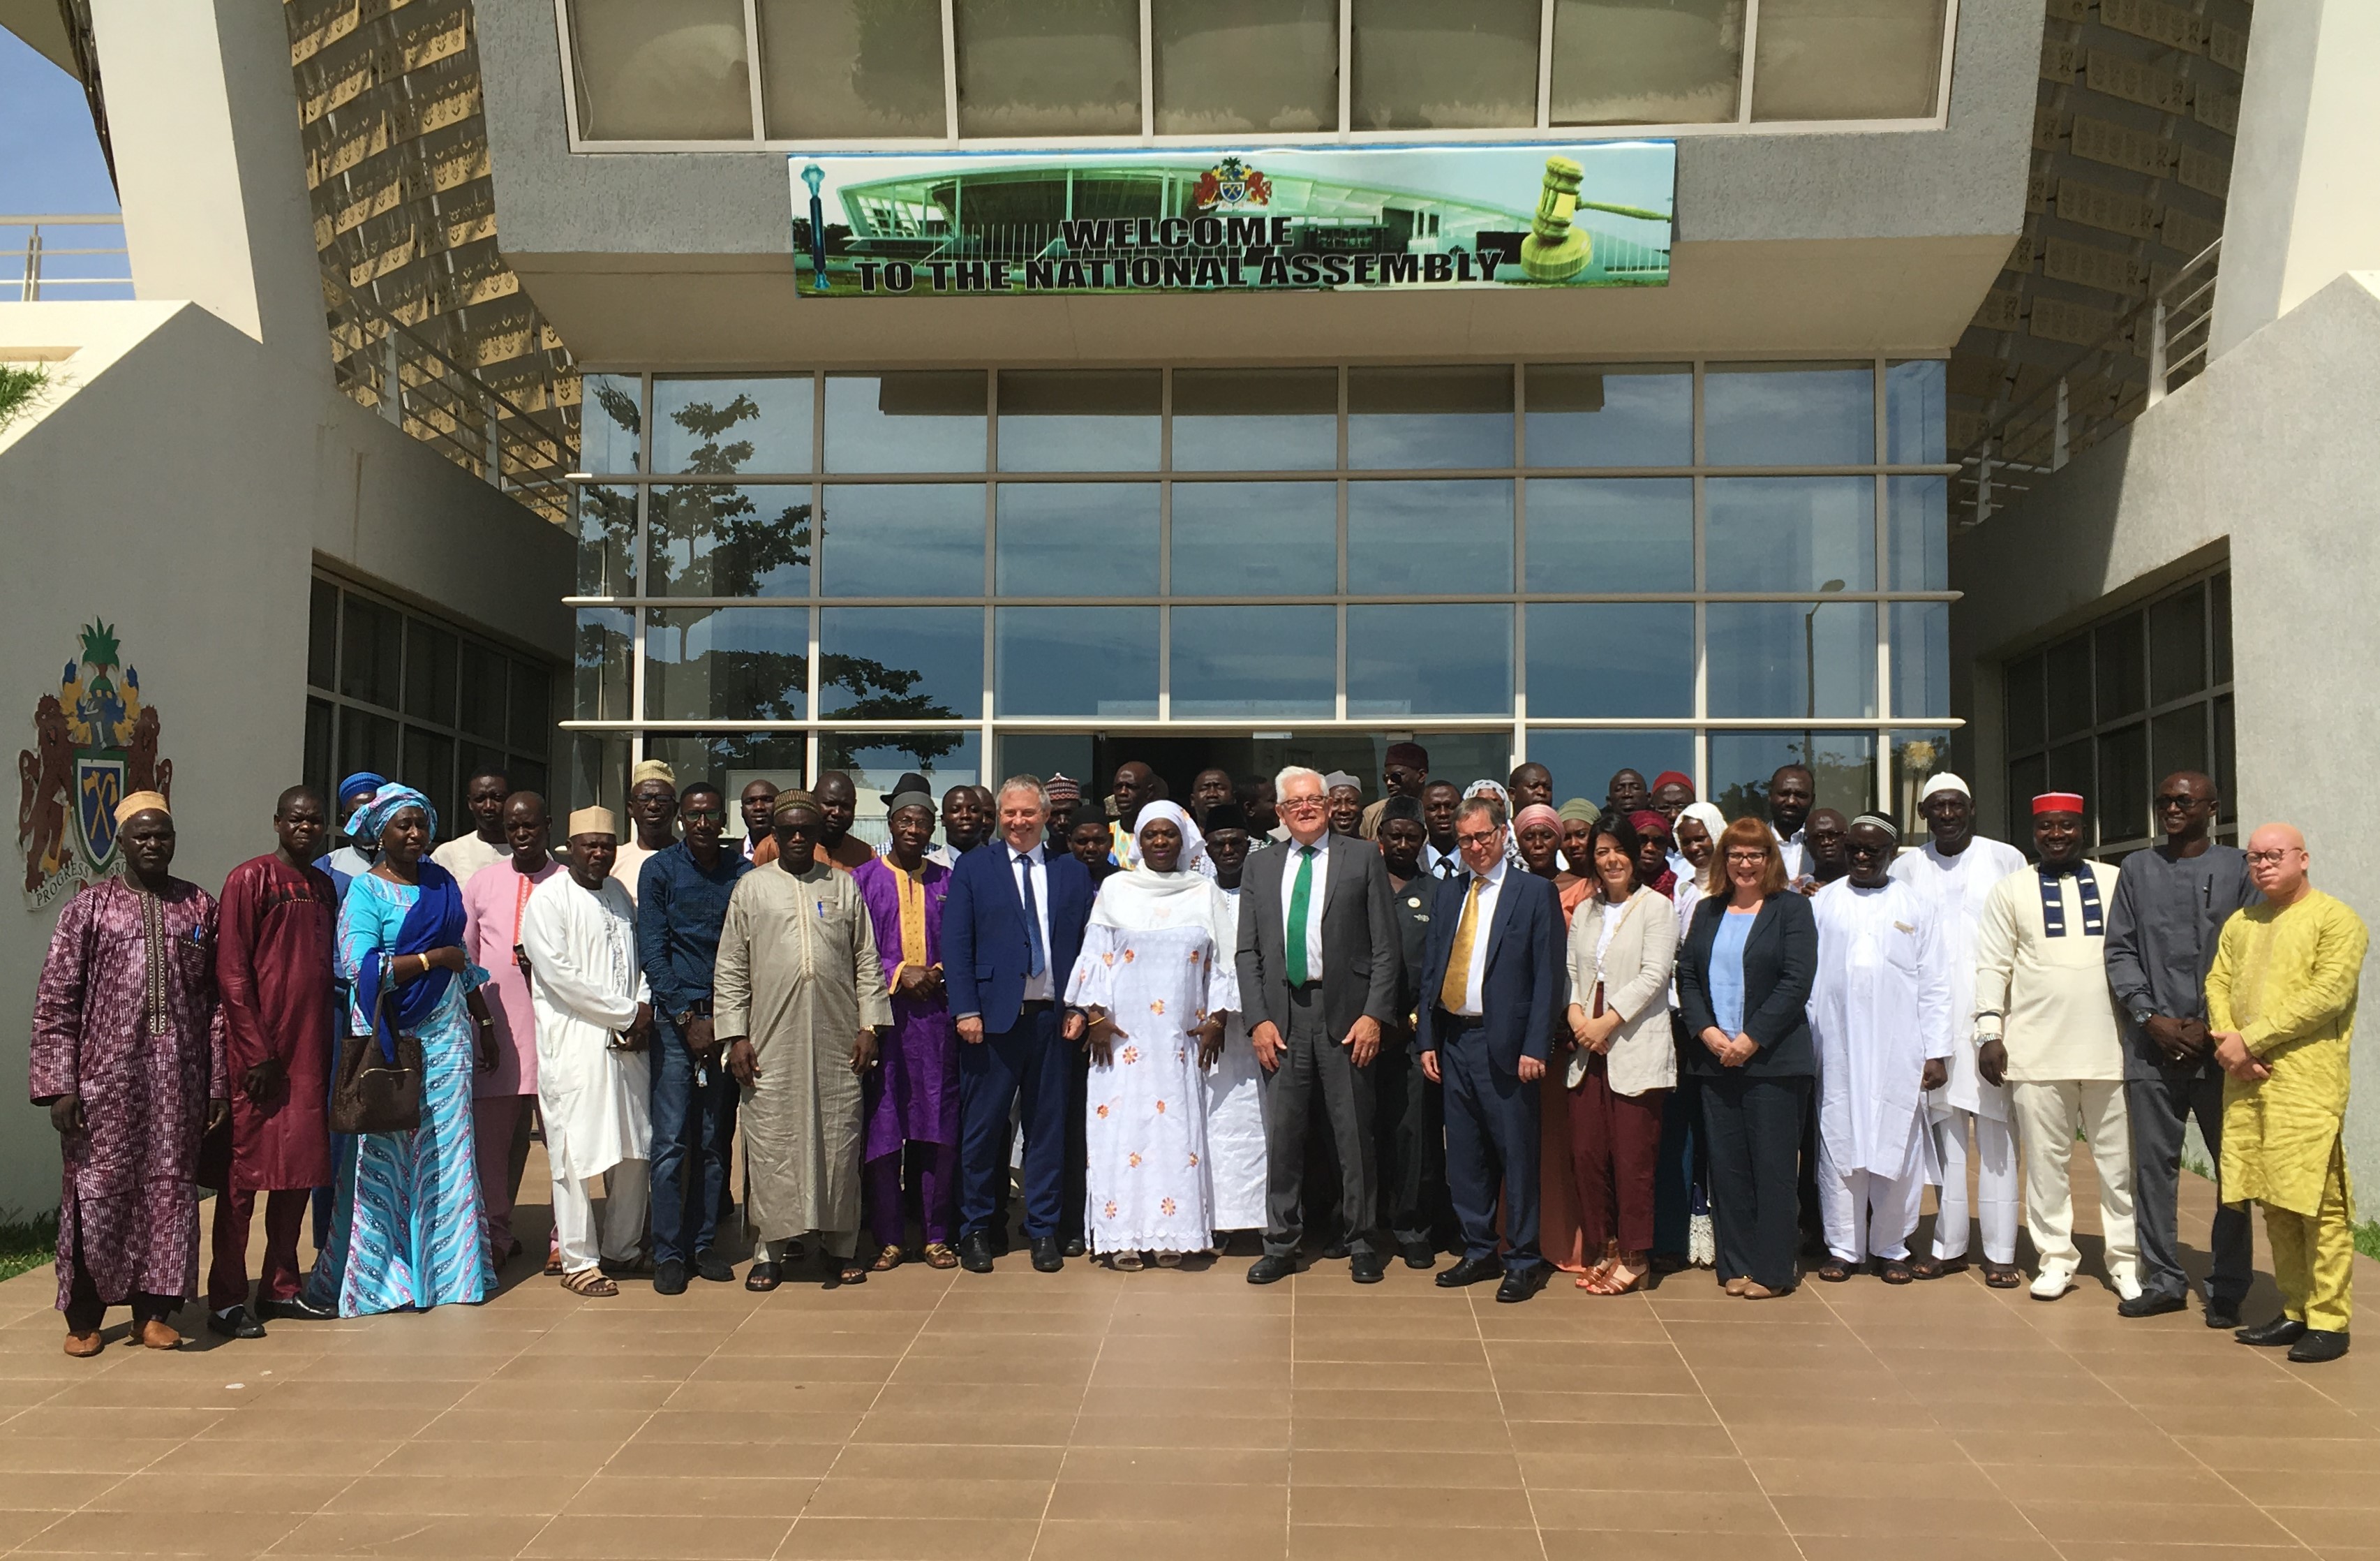 Workshop participants and speakers including Hon. Speaker Mariam Jack-Denton MNA at the National Assembly of the Gambia